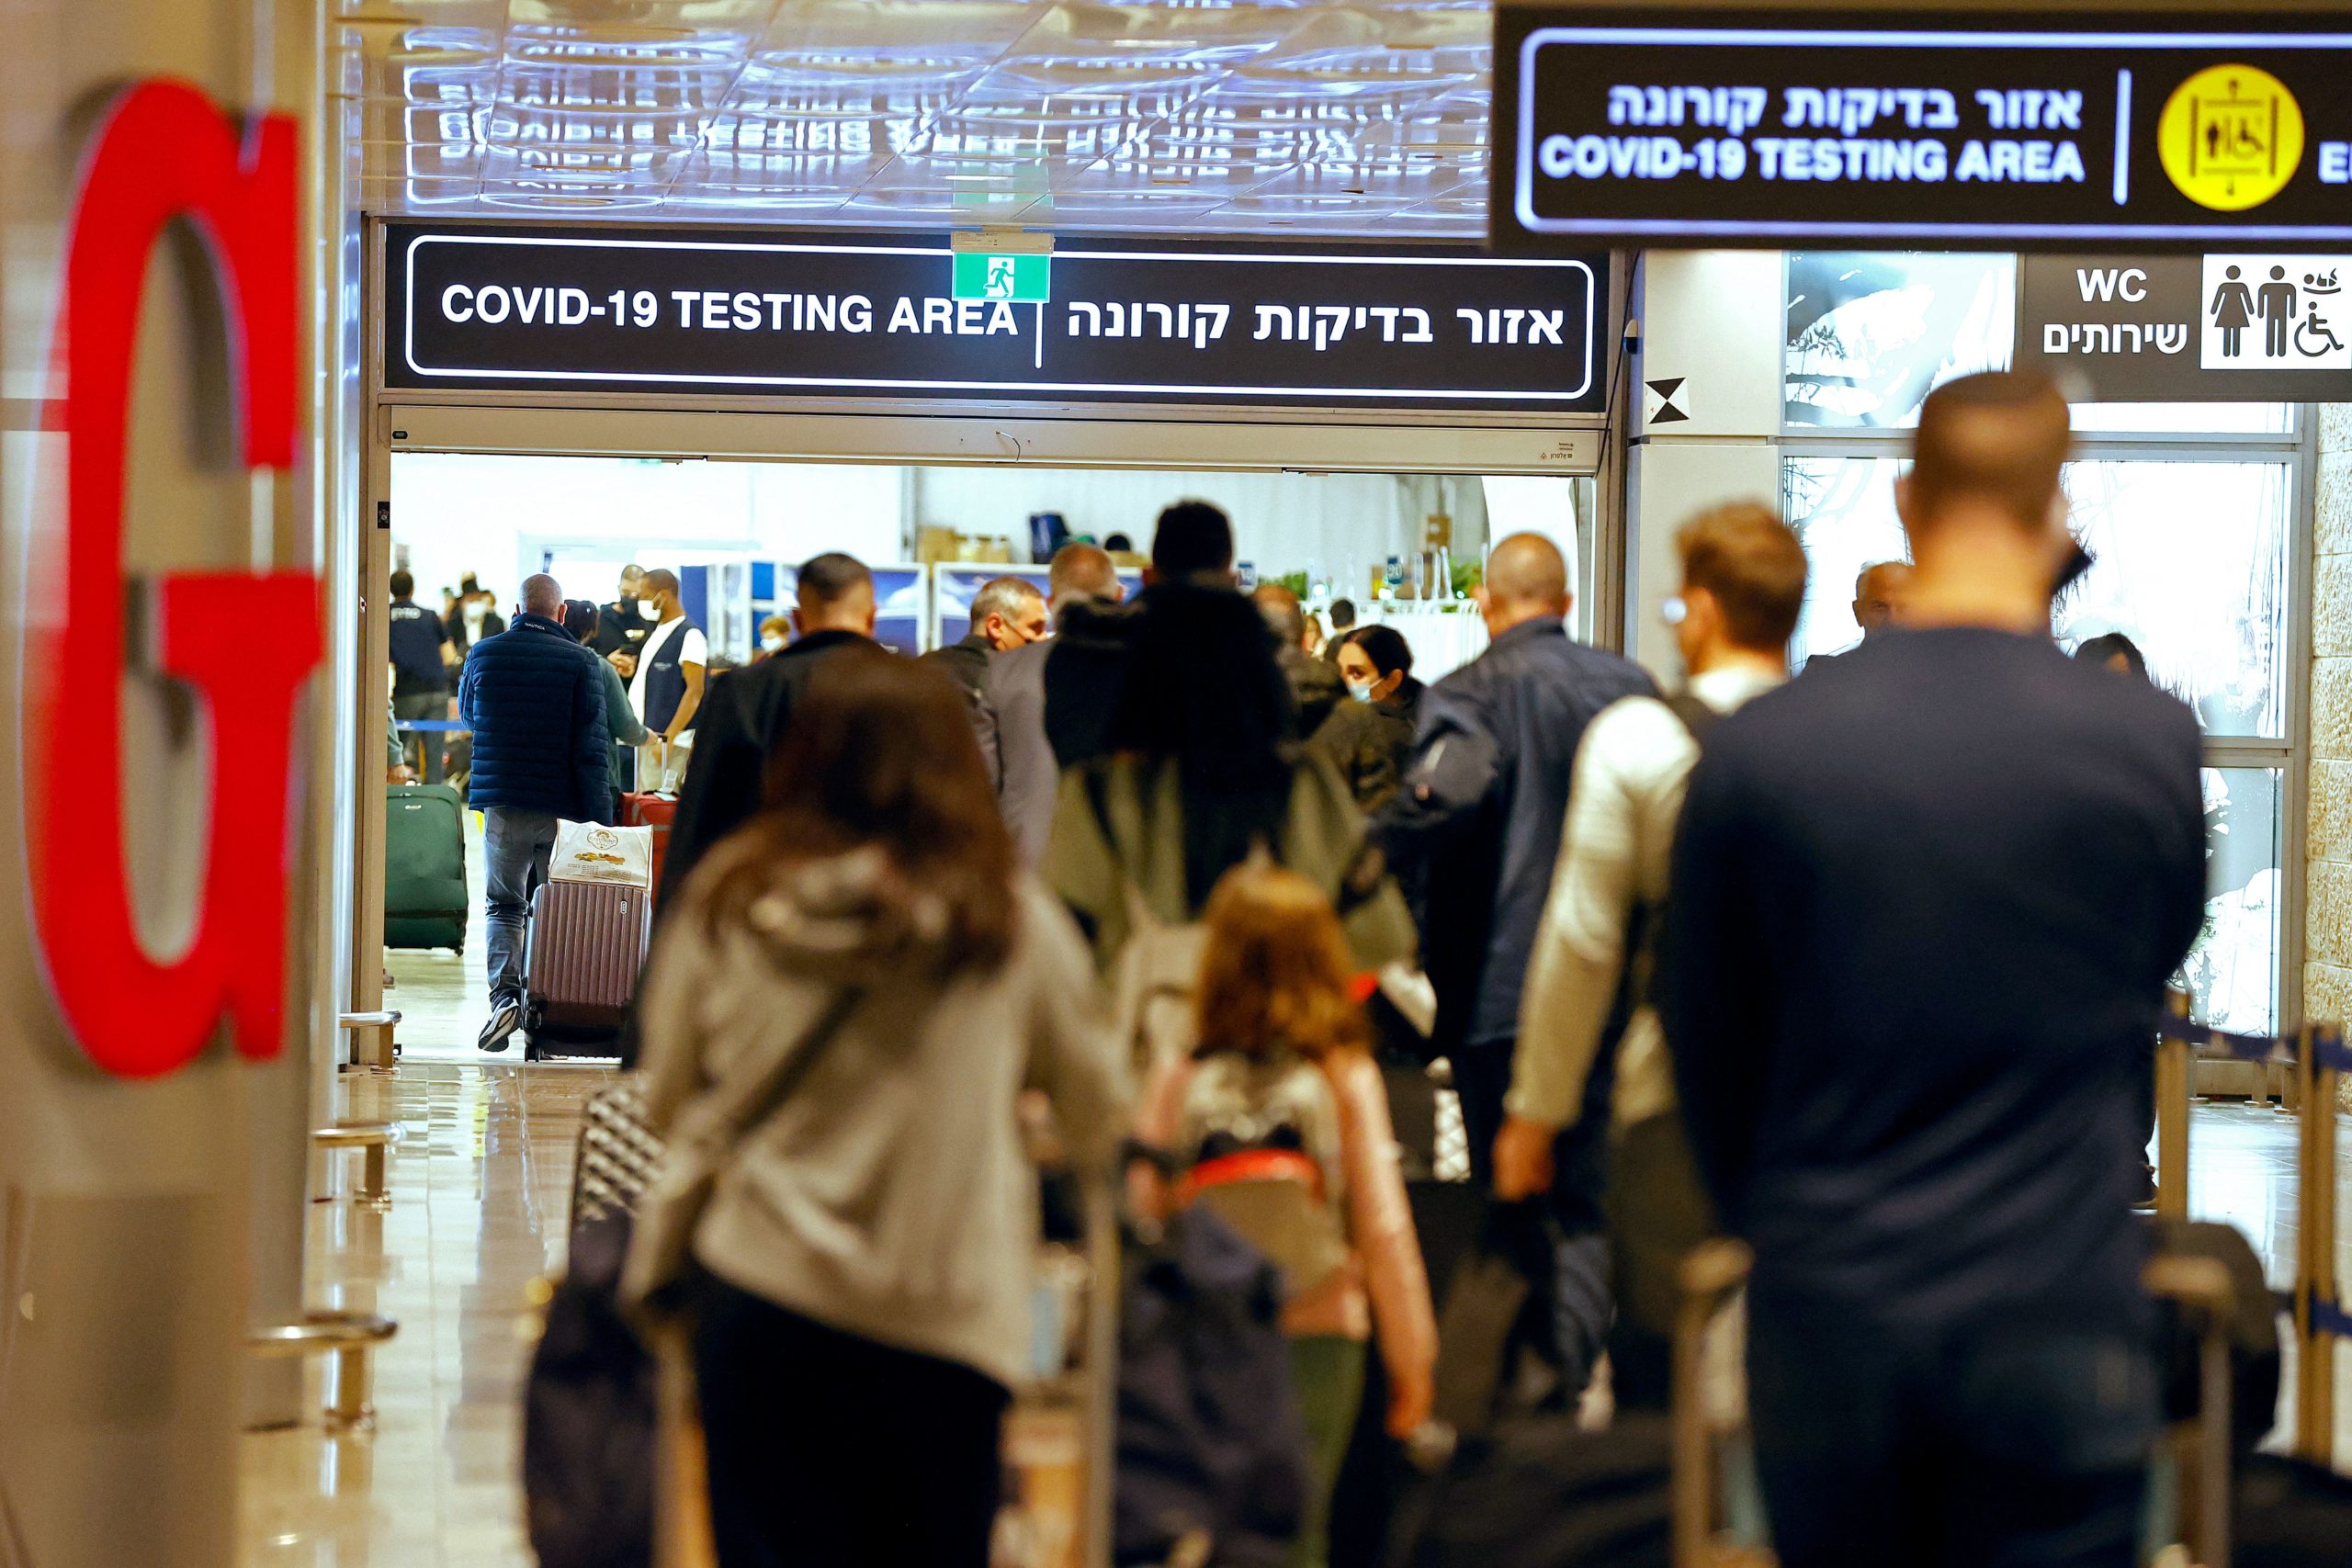 Passengers walk with their luggage upon their arrival at Ben Gurion Airport near Lod on November 1, 2021, as Israel reopens to tourists vaccinated against Covid-19. (JACK GUEZ/AFP via Getty Images)